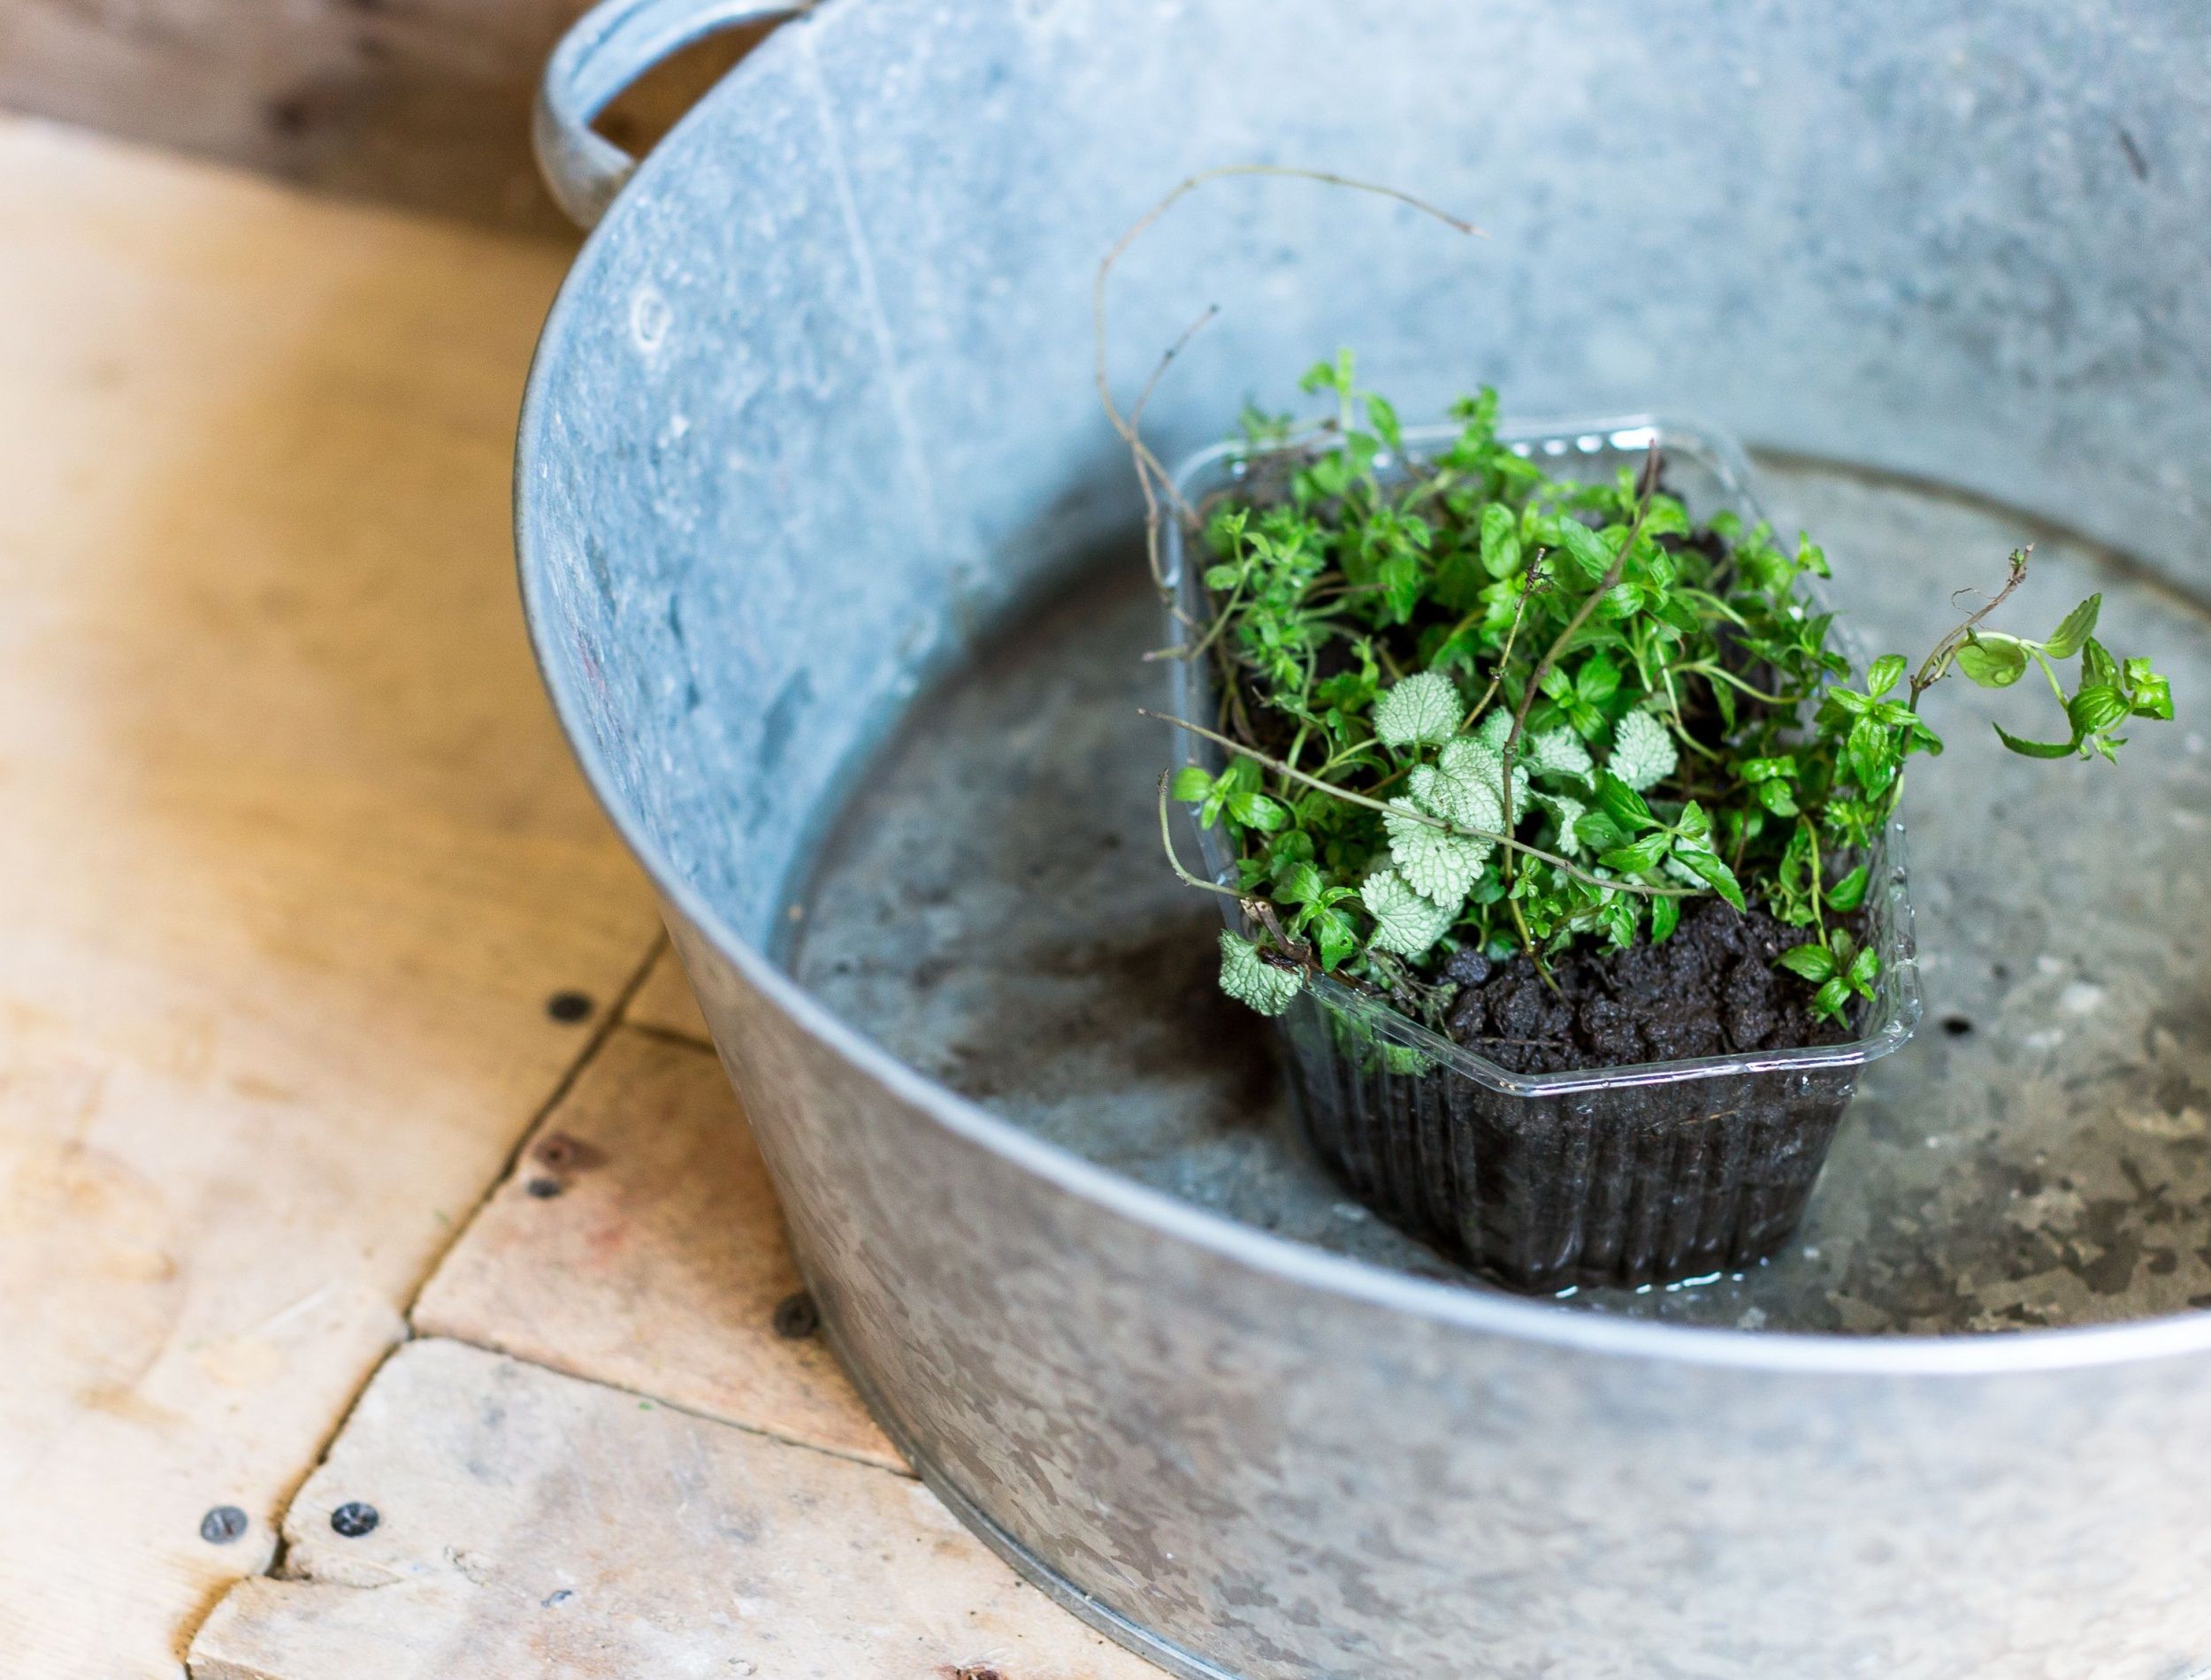 floral decor, gardening, care concept. on the rough wooden surface of floor there is aluminum basin with water on the bottom of it and plastic box full of wet soil and curly green plant